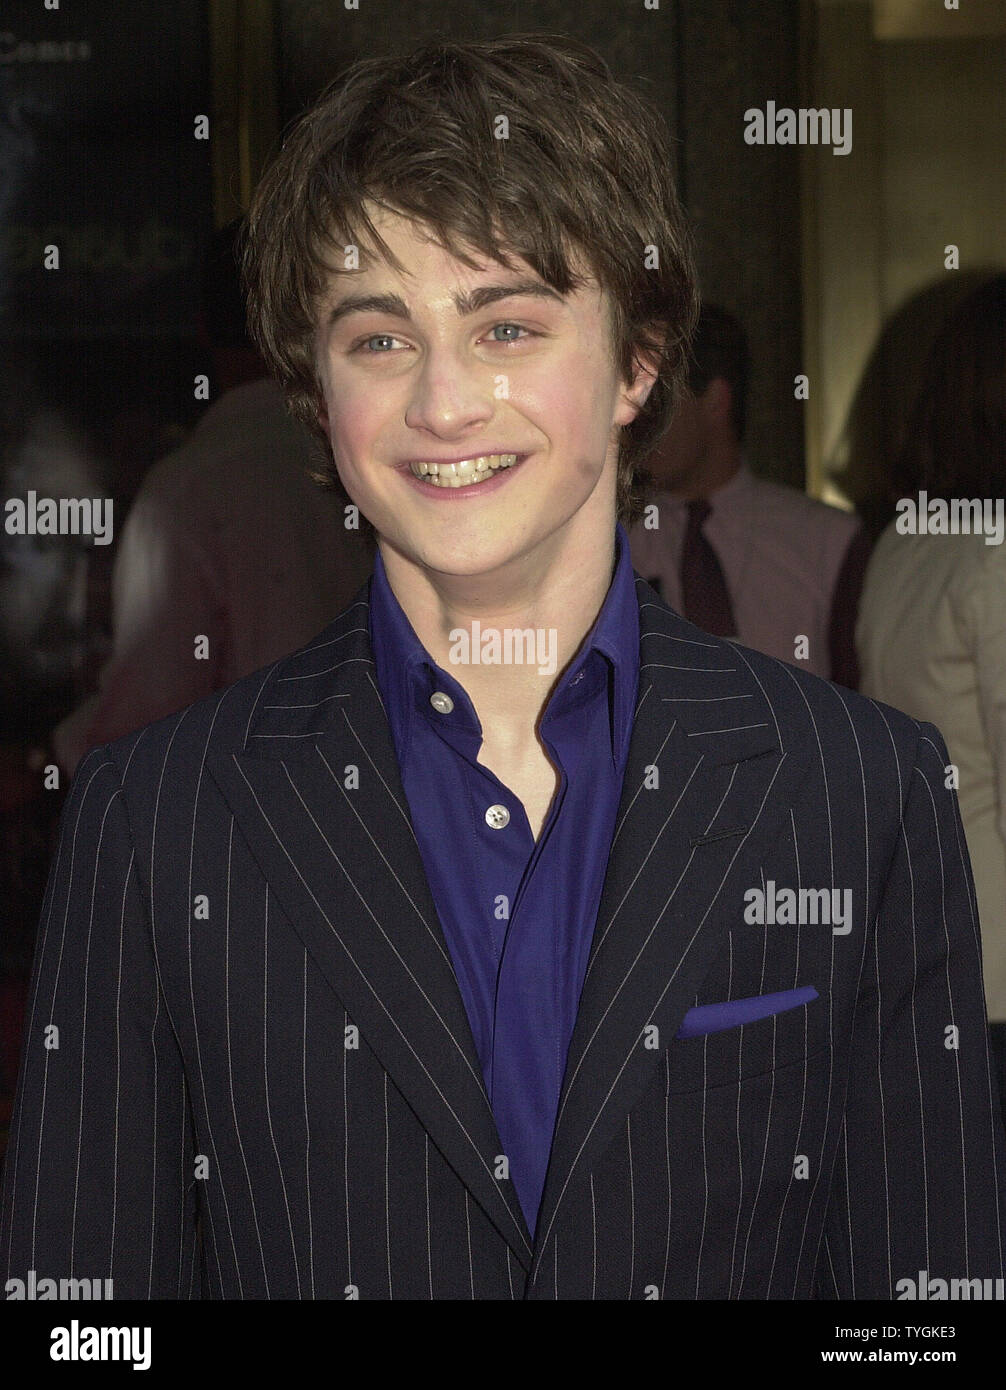 Actor Daniel Radcliffe who protrays Harry Potter poses on May 23, 2004 at  the US premiere of his film "Harry Potter and the Prisoner of Azkaran" at  New York's Radio City Music